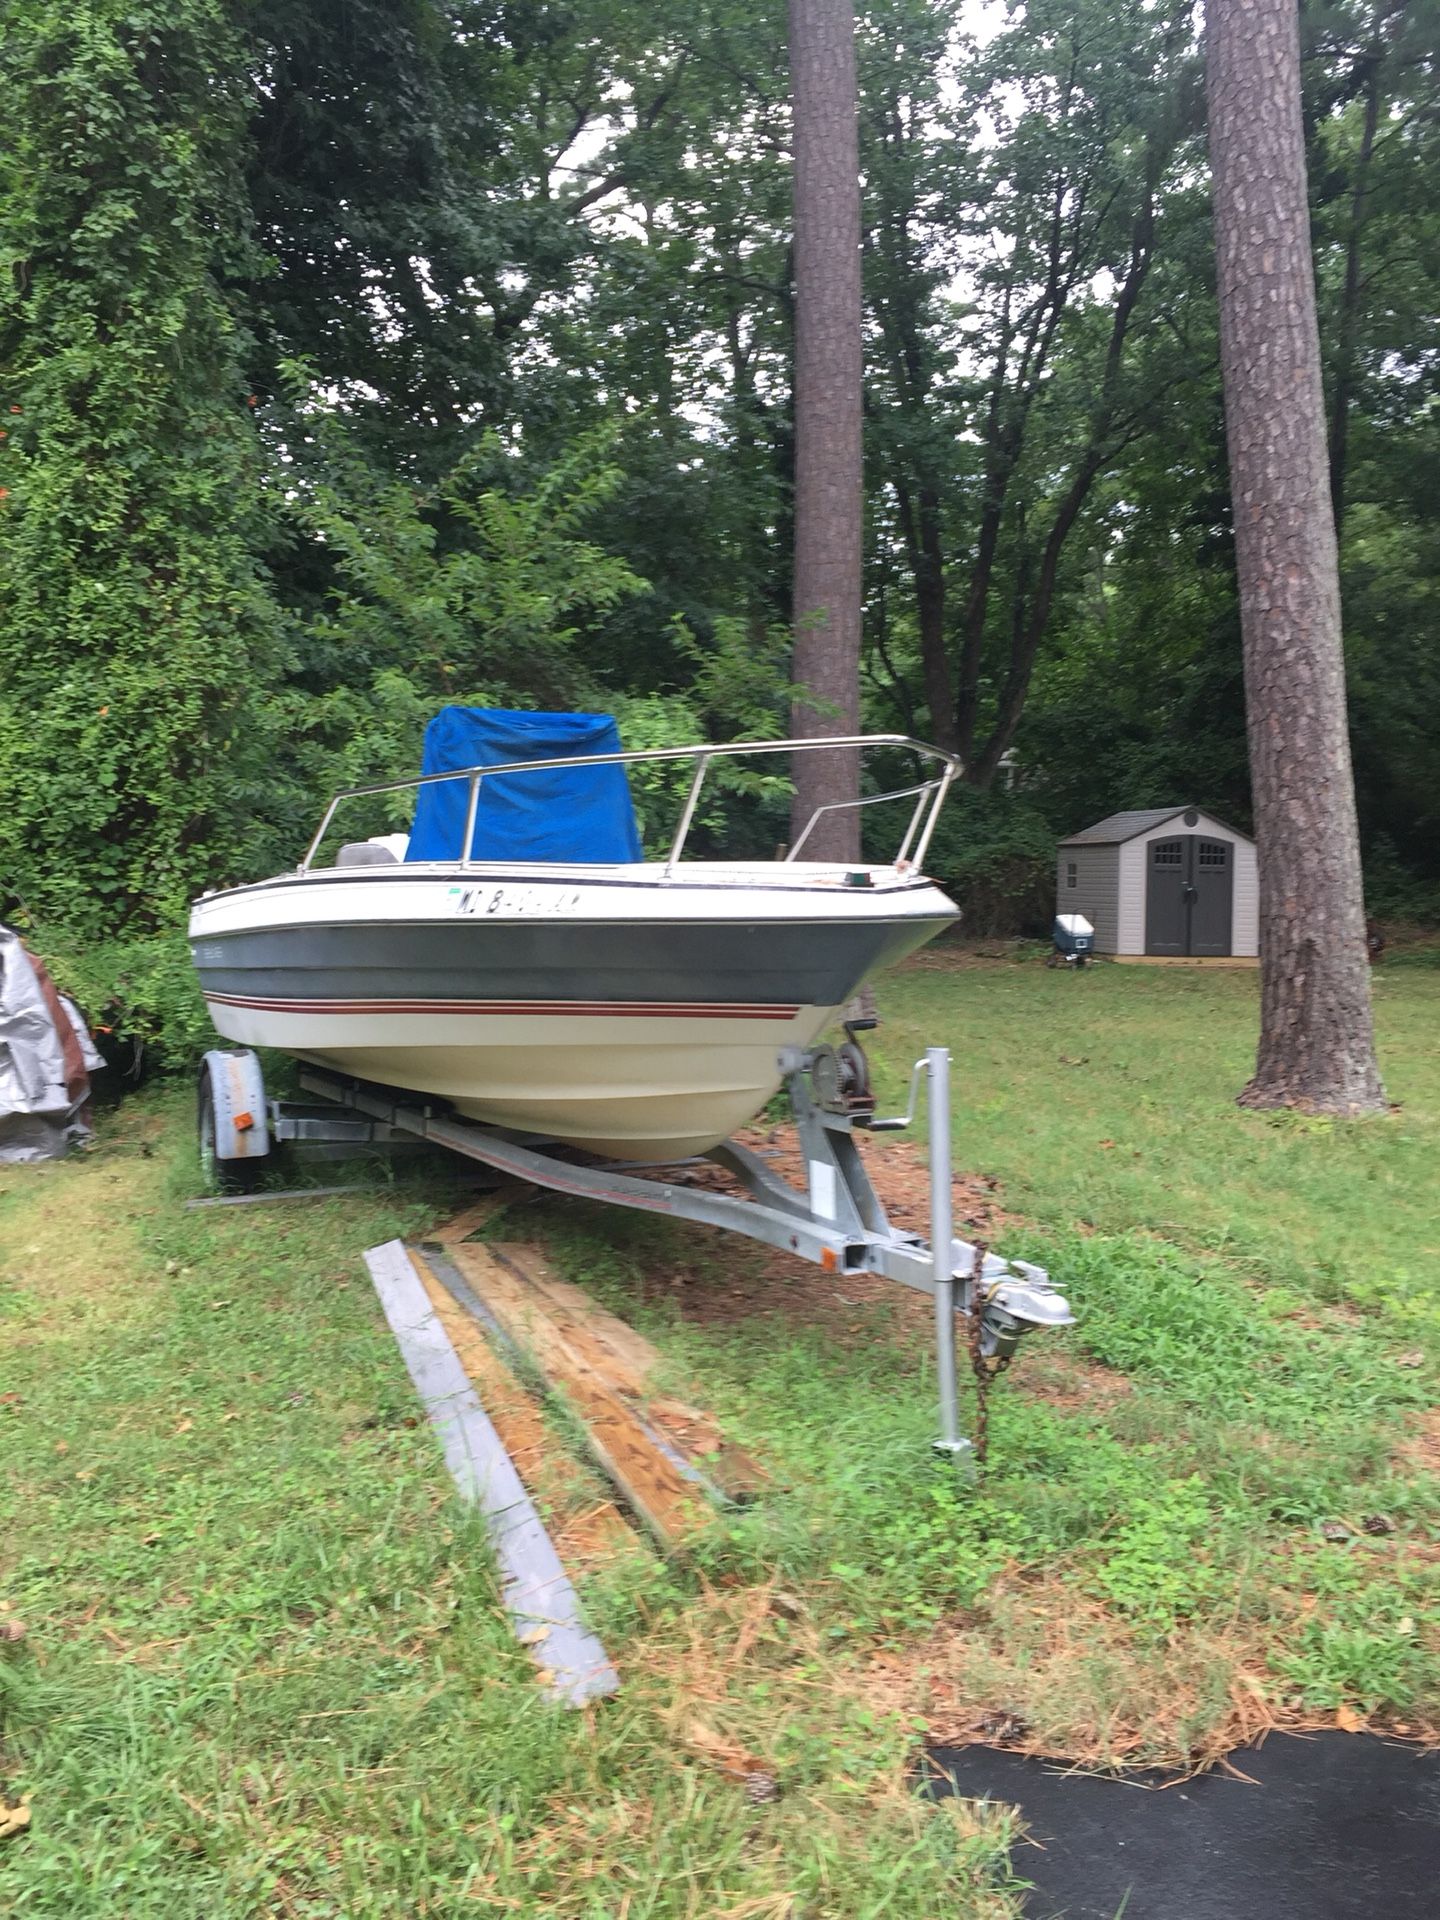 Boat for sale $500 or Best Offer